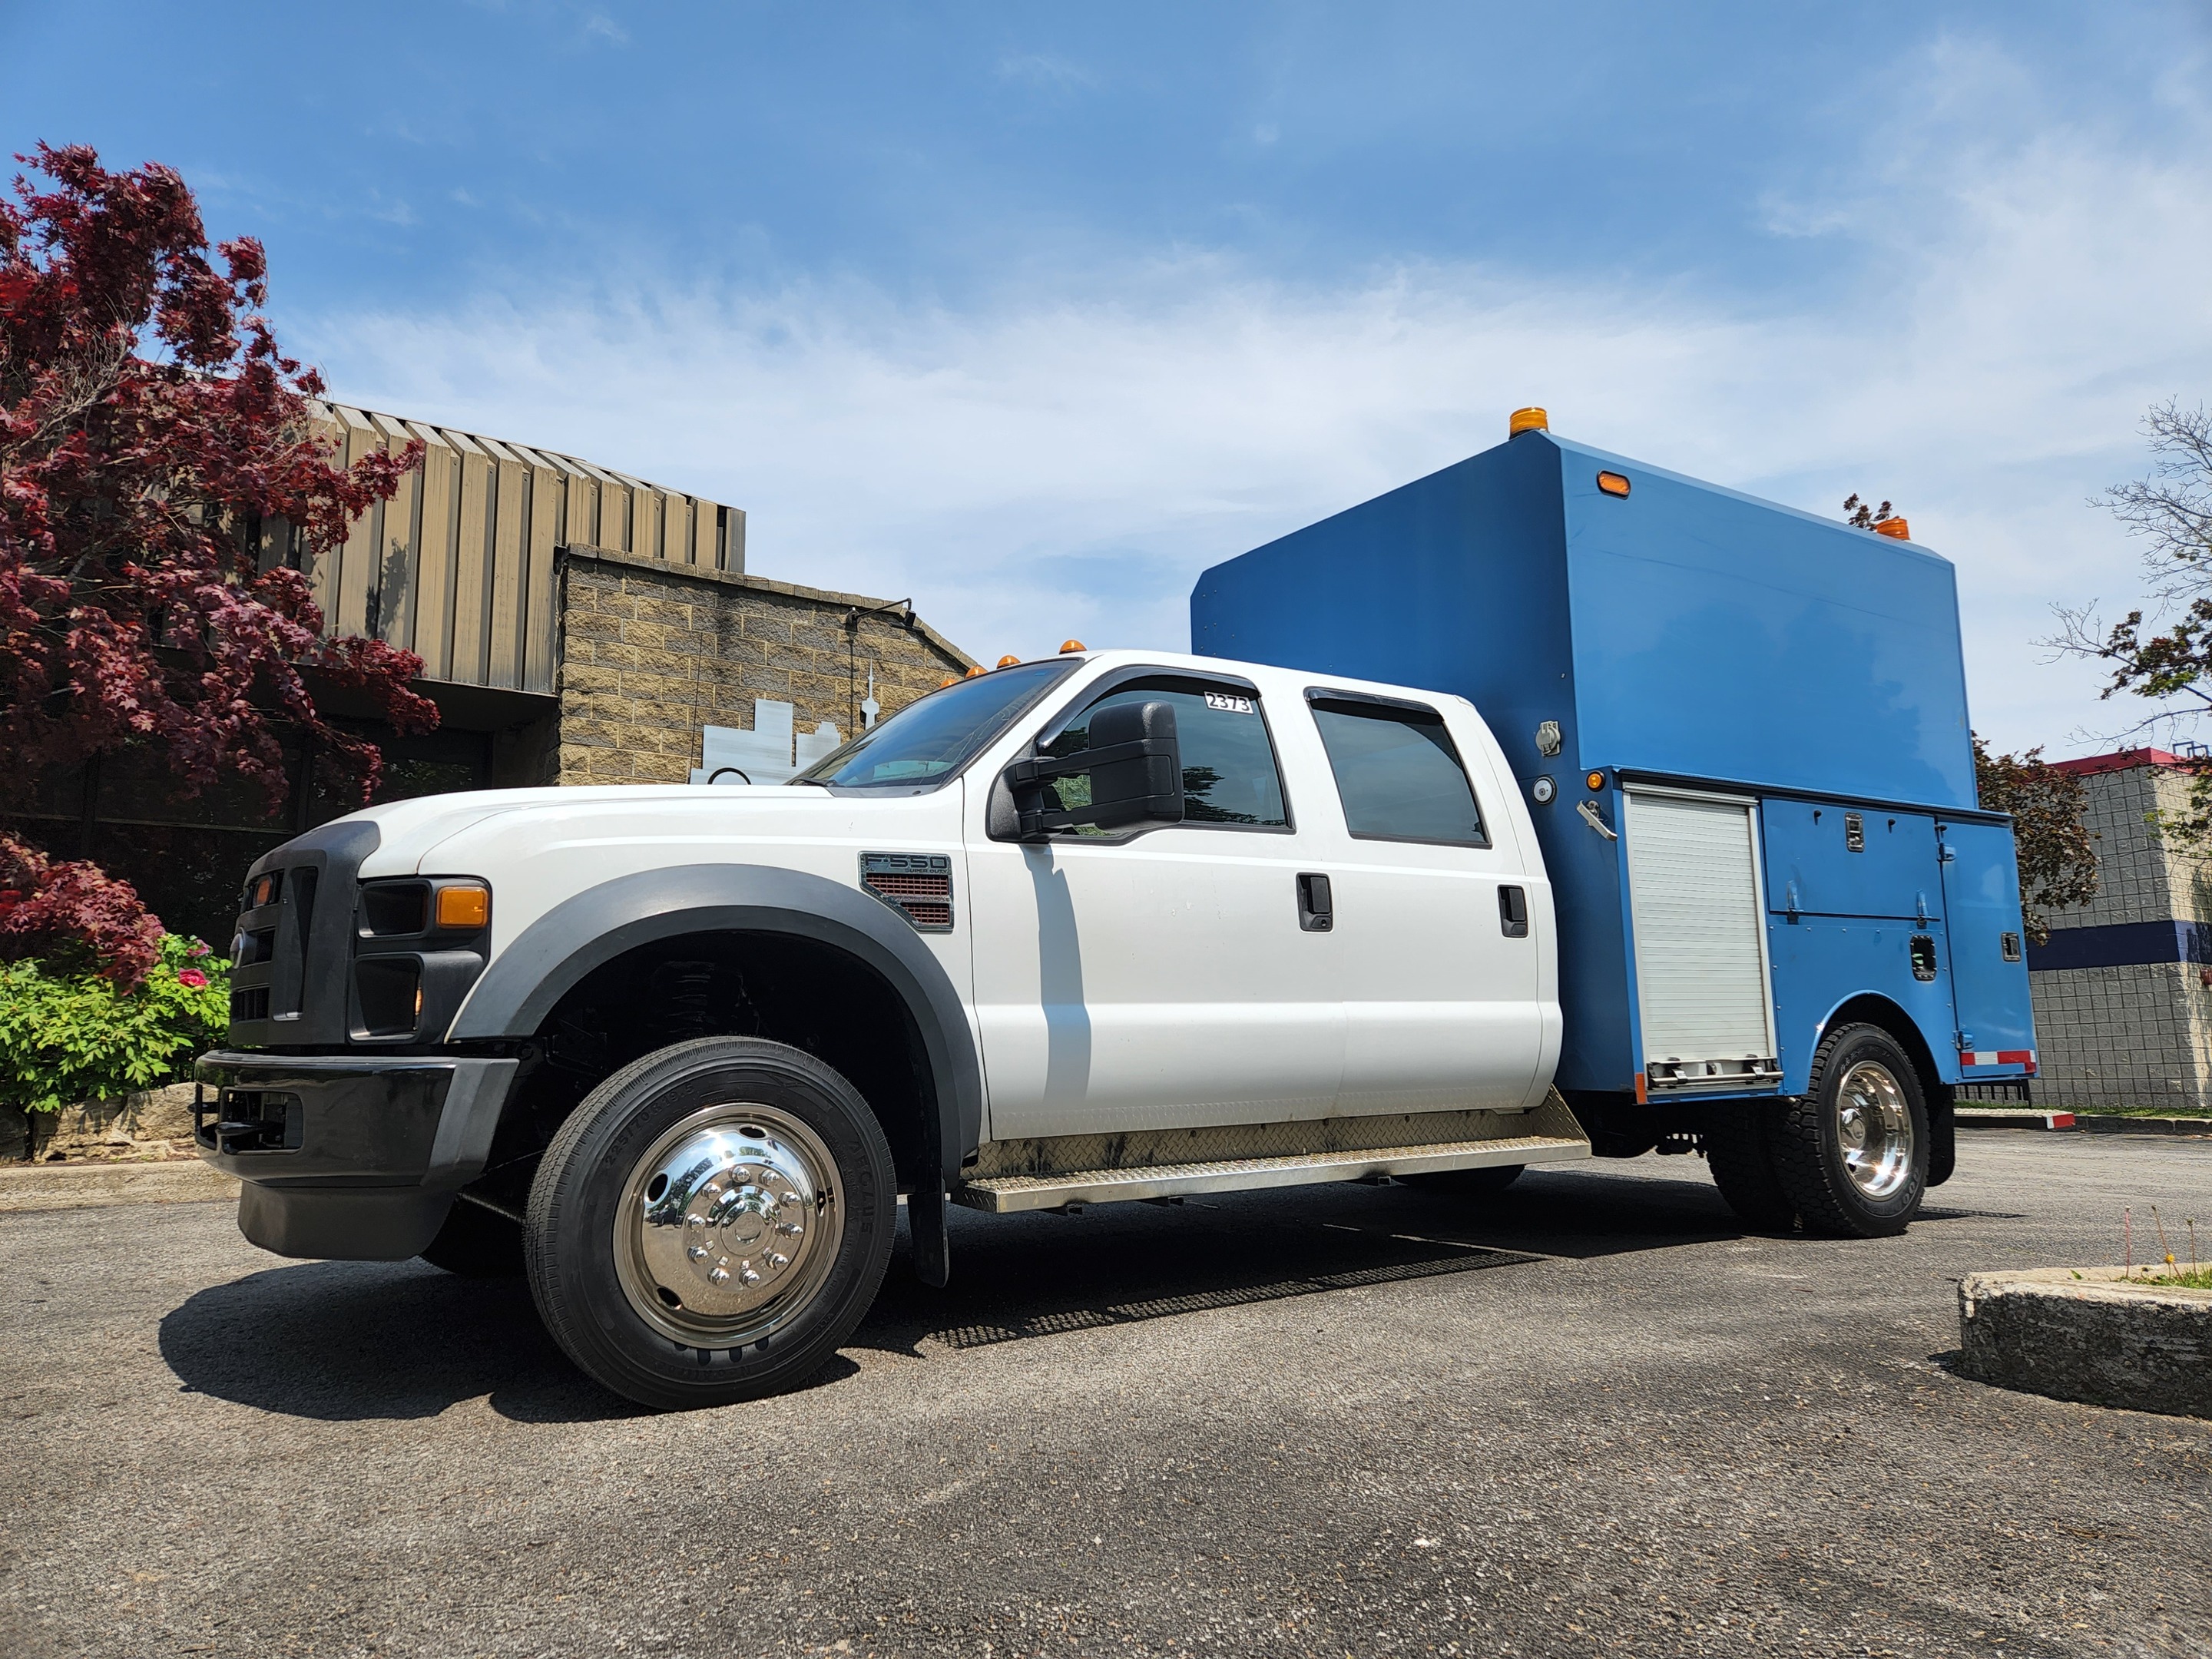 2012 Ford F-550 Crew Cab, 9' Service Body, ONLY